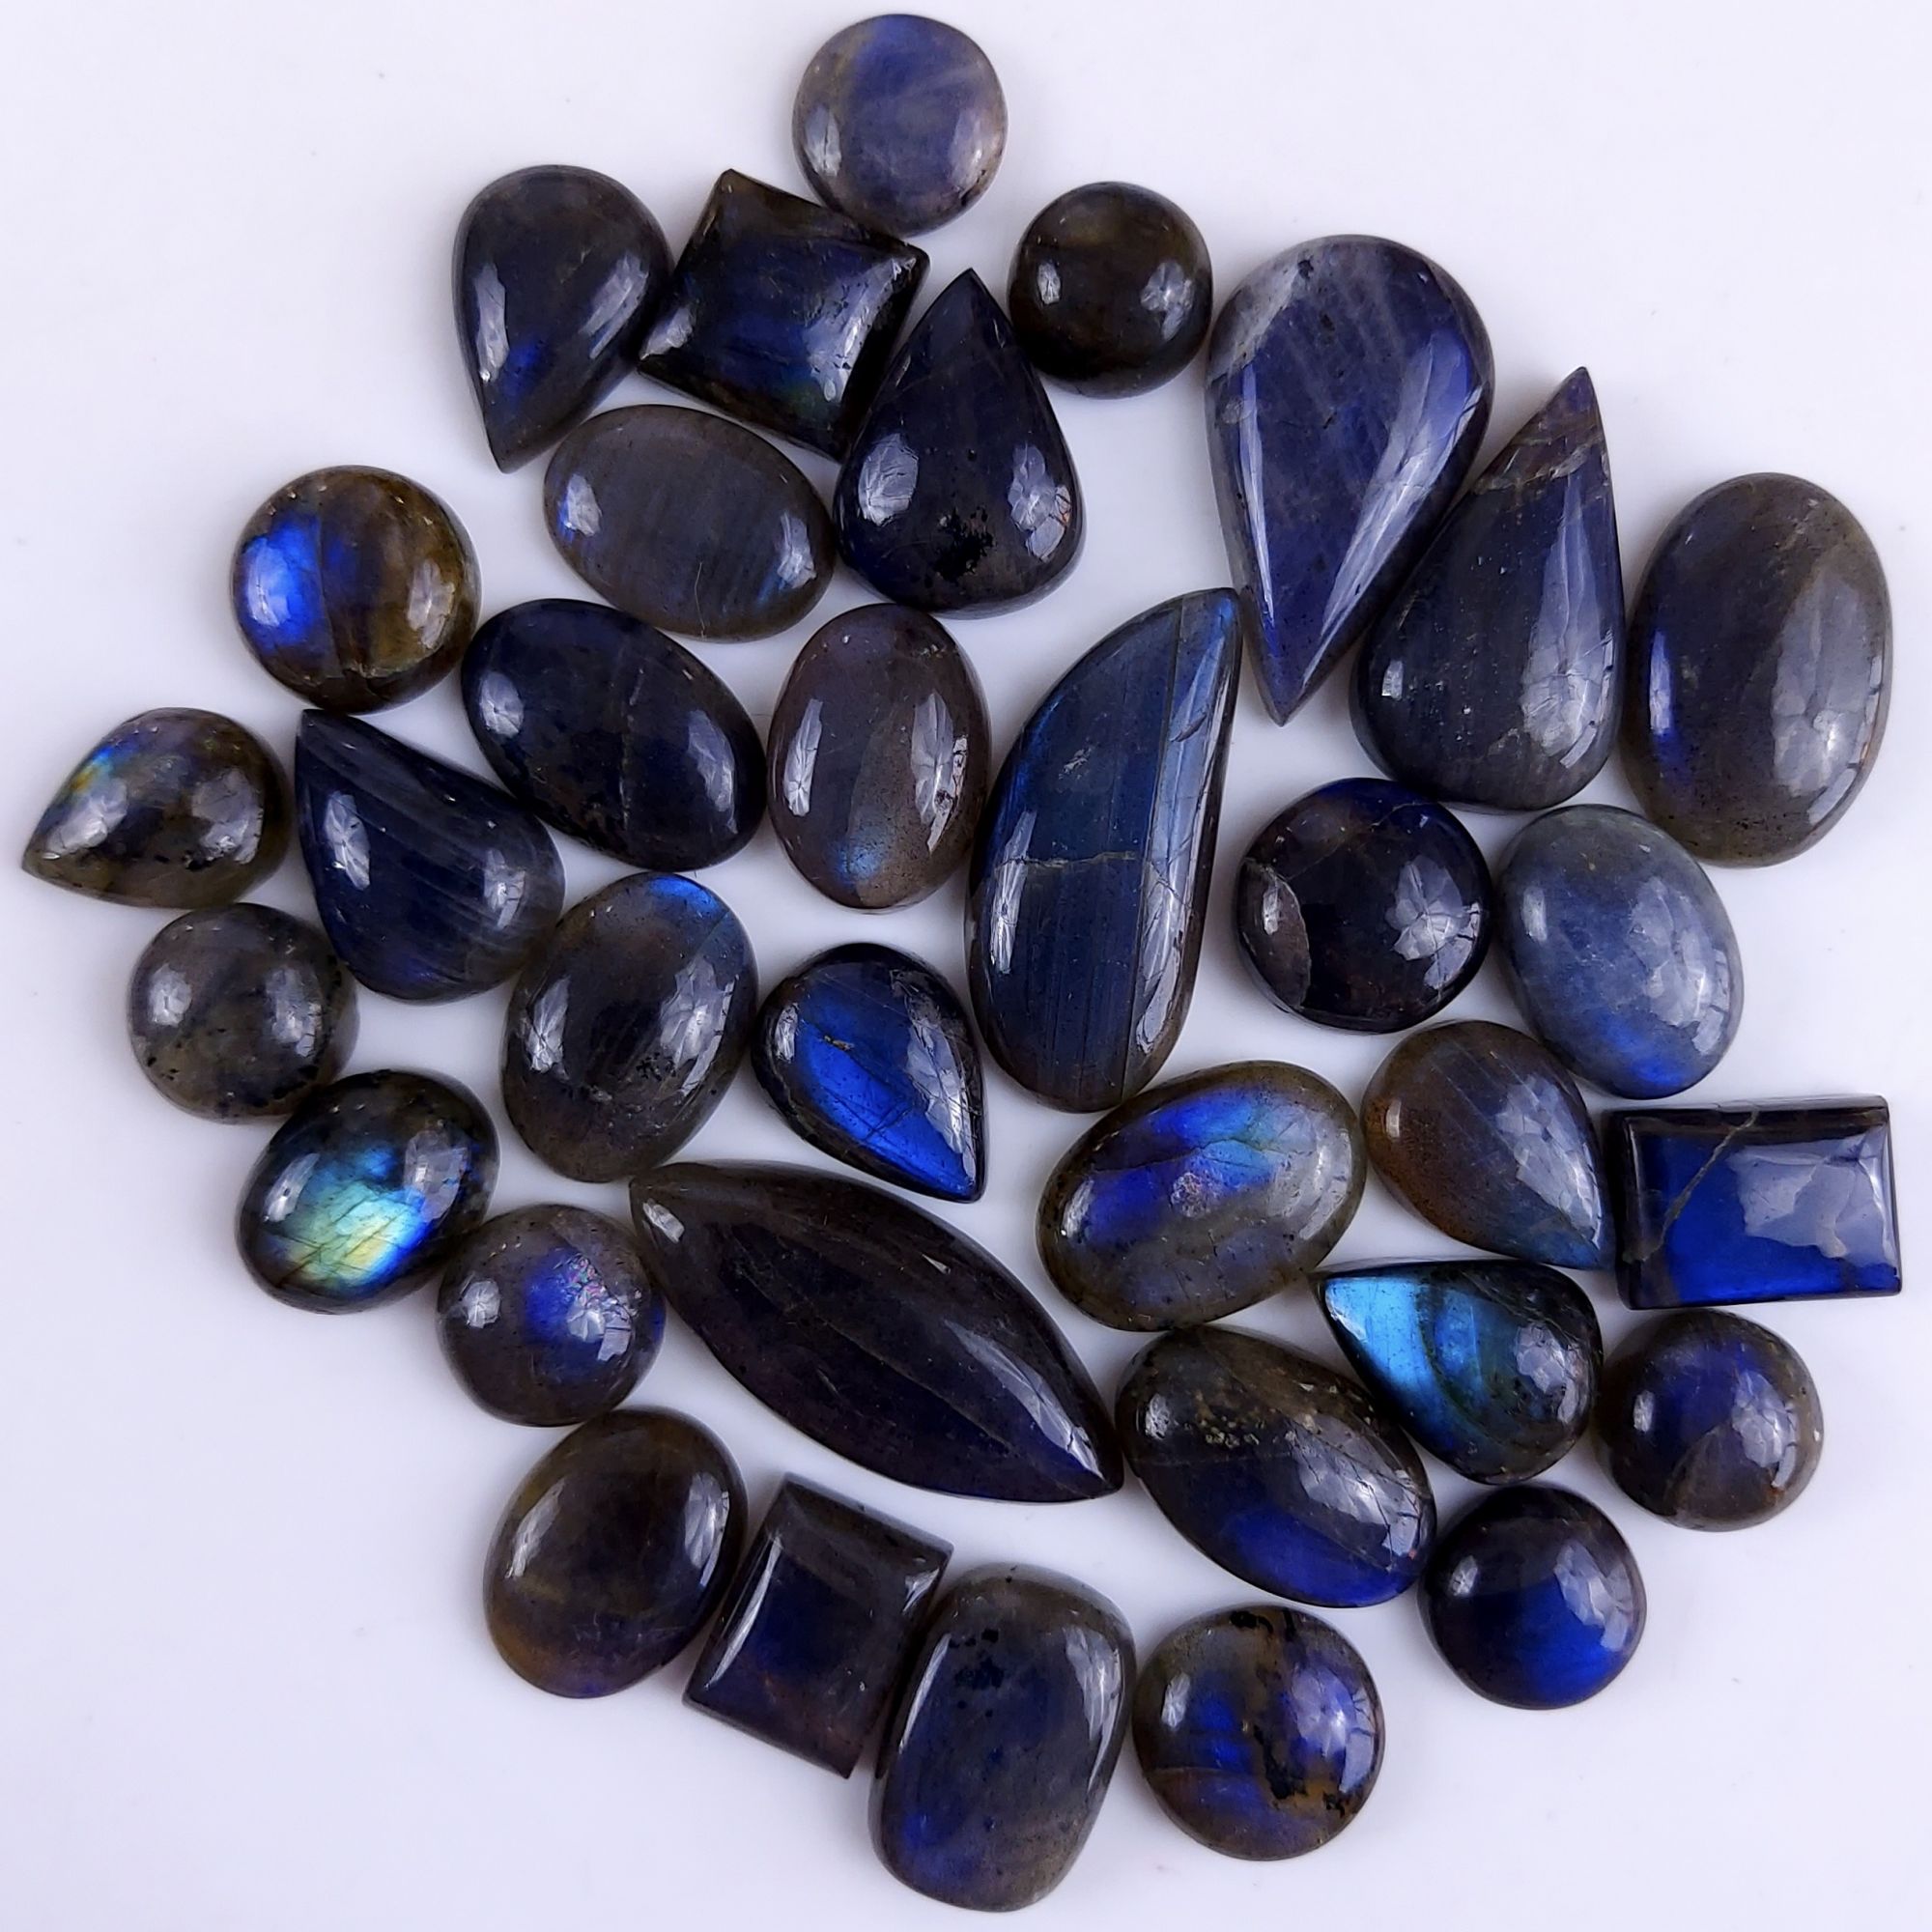 34Pcs 409Cts Natural Labradorite Calibrated Cabochon Mix Size And Shape Loose Gemstone Lot For Jewelry Making 33x14 12x12 mm#753